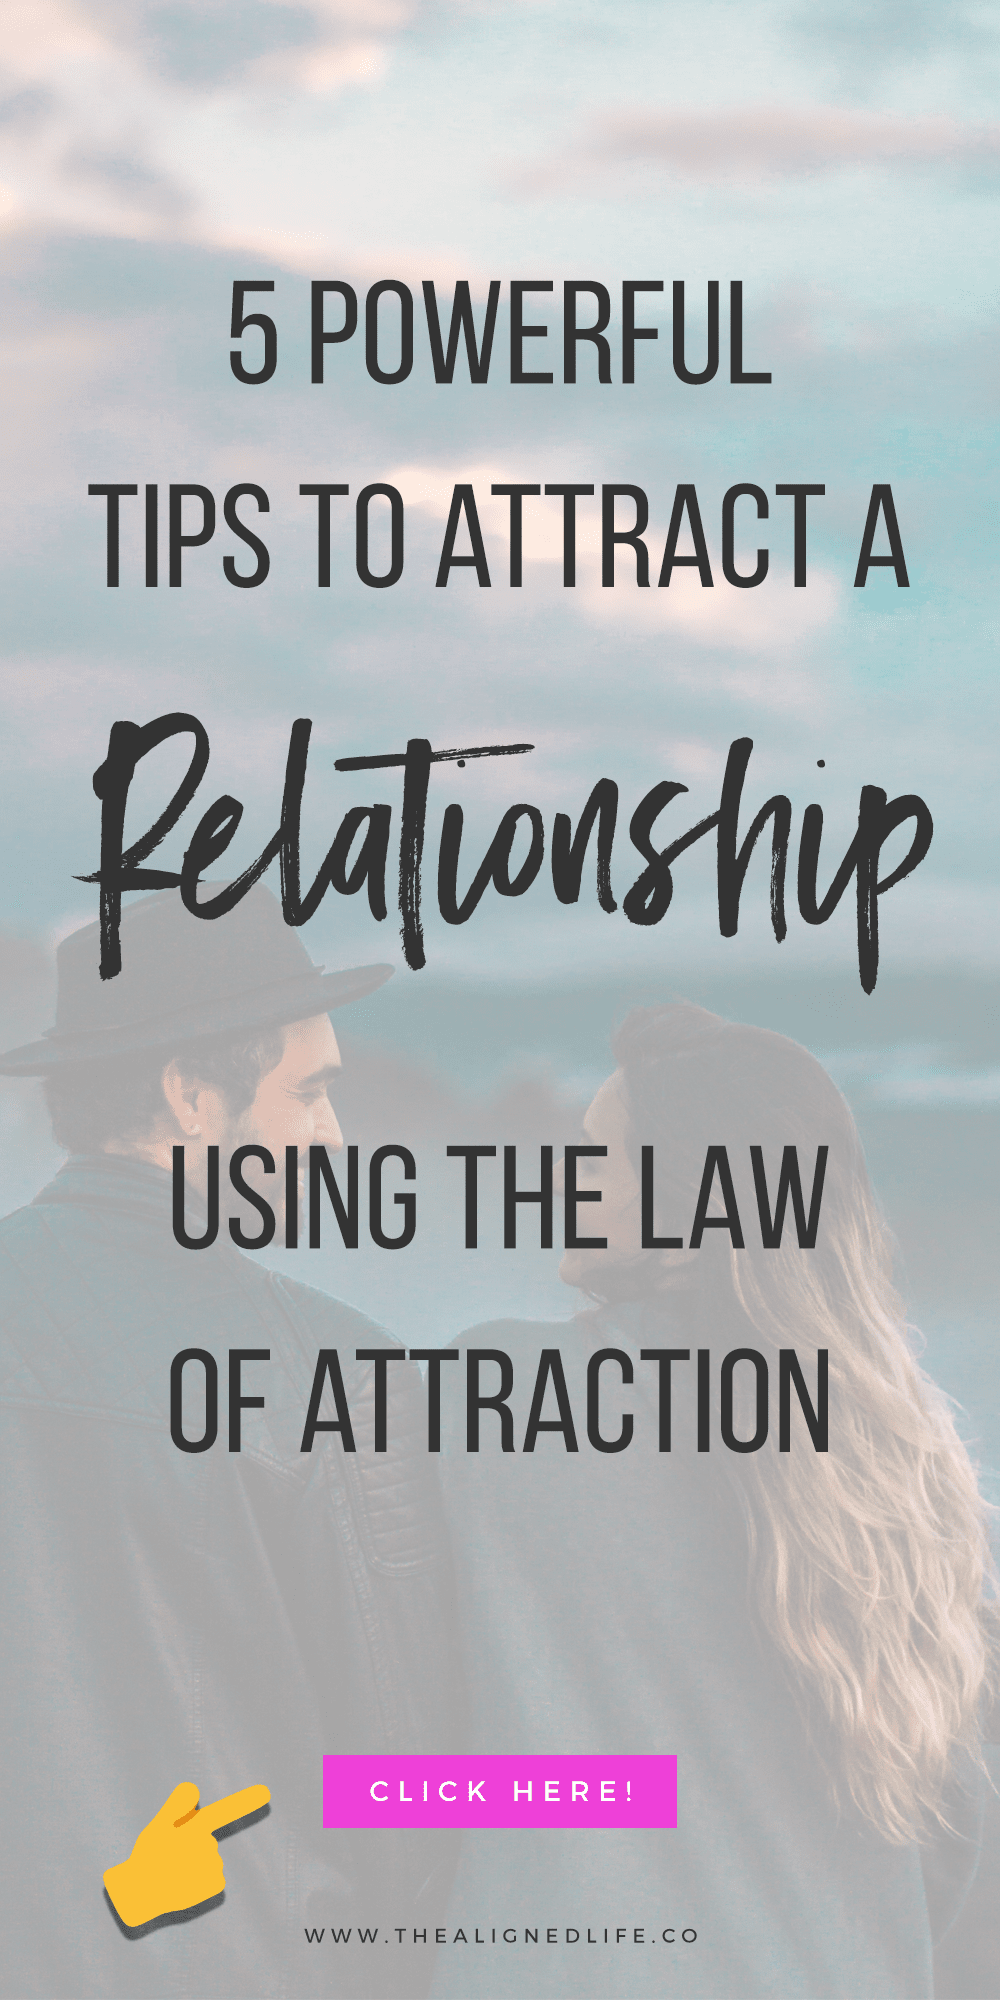 5 Powerful Tips To Attract A Relationship Using The Law Of Attraction